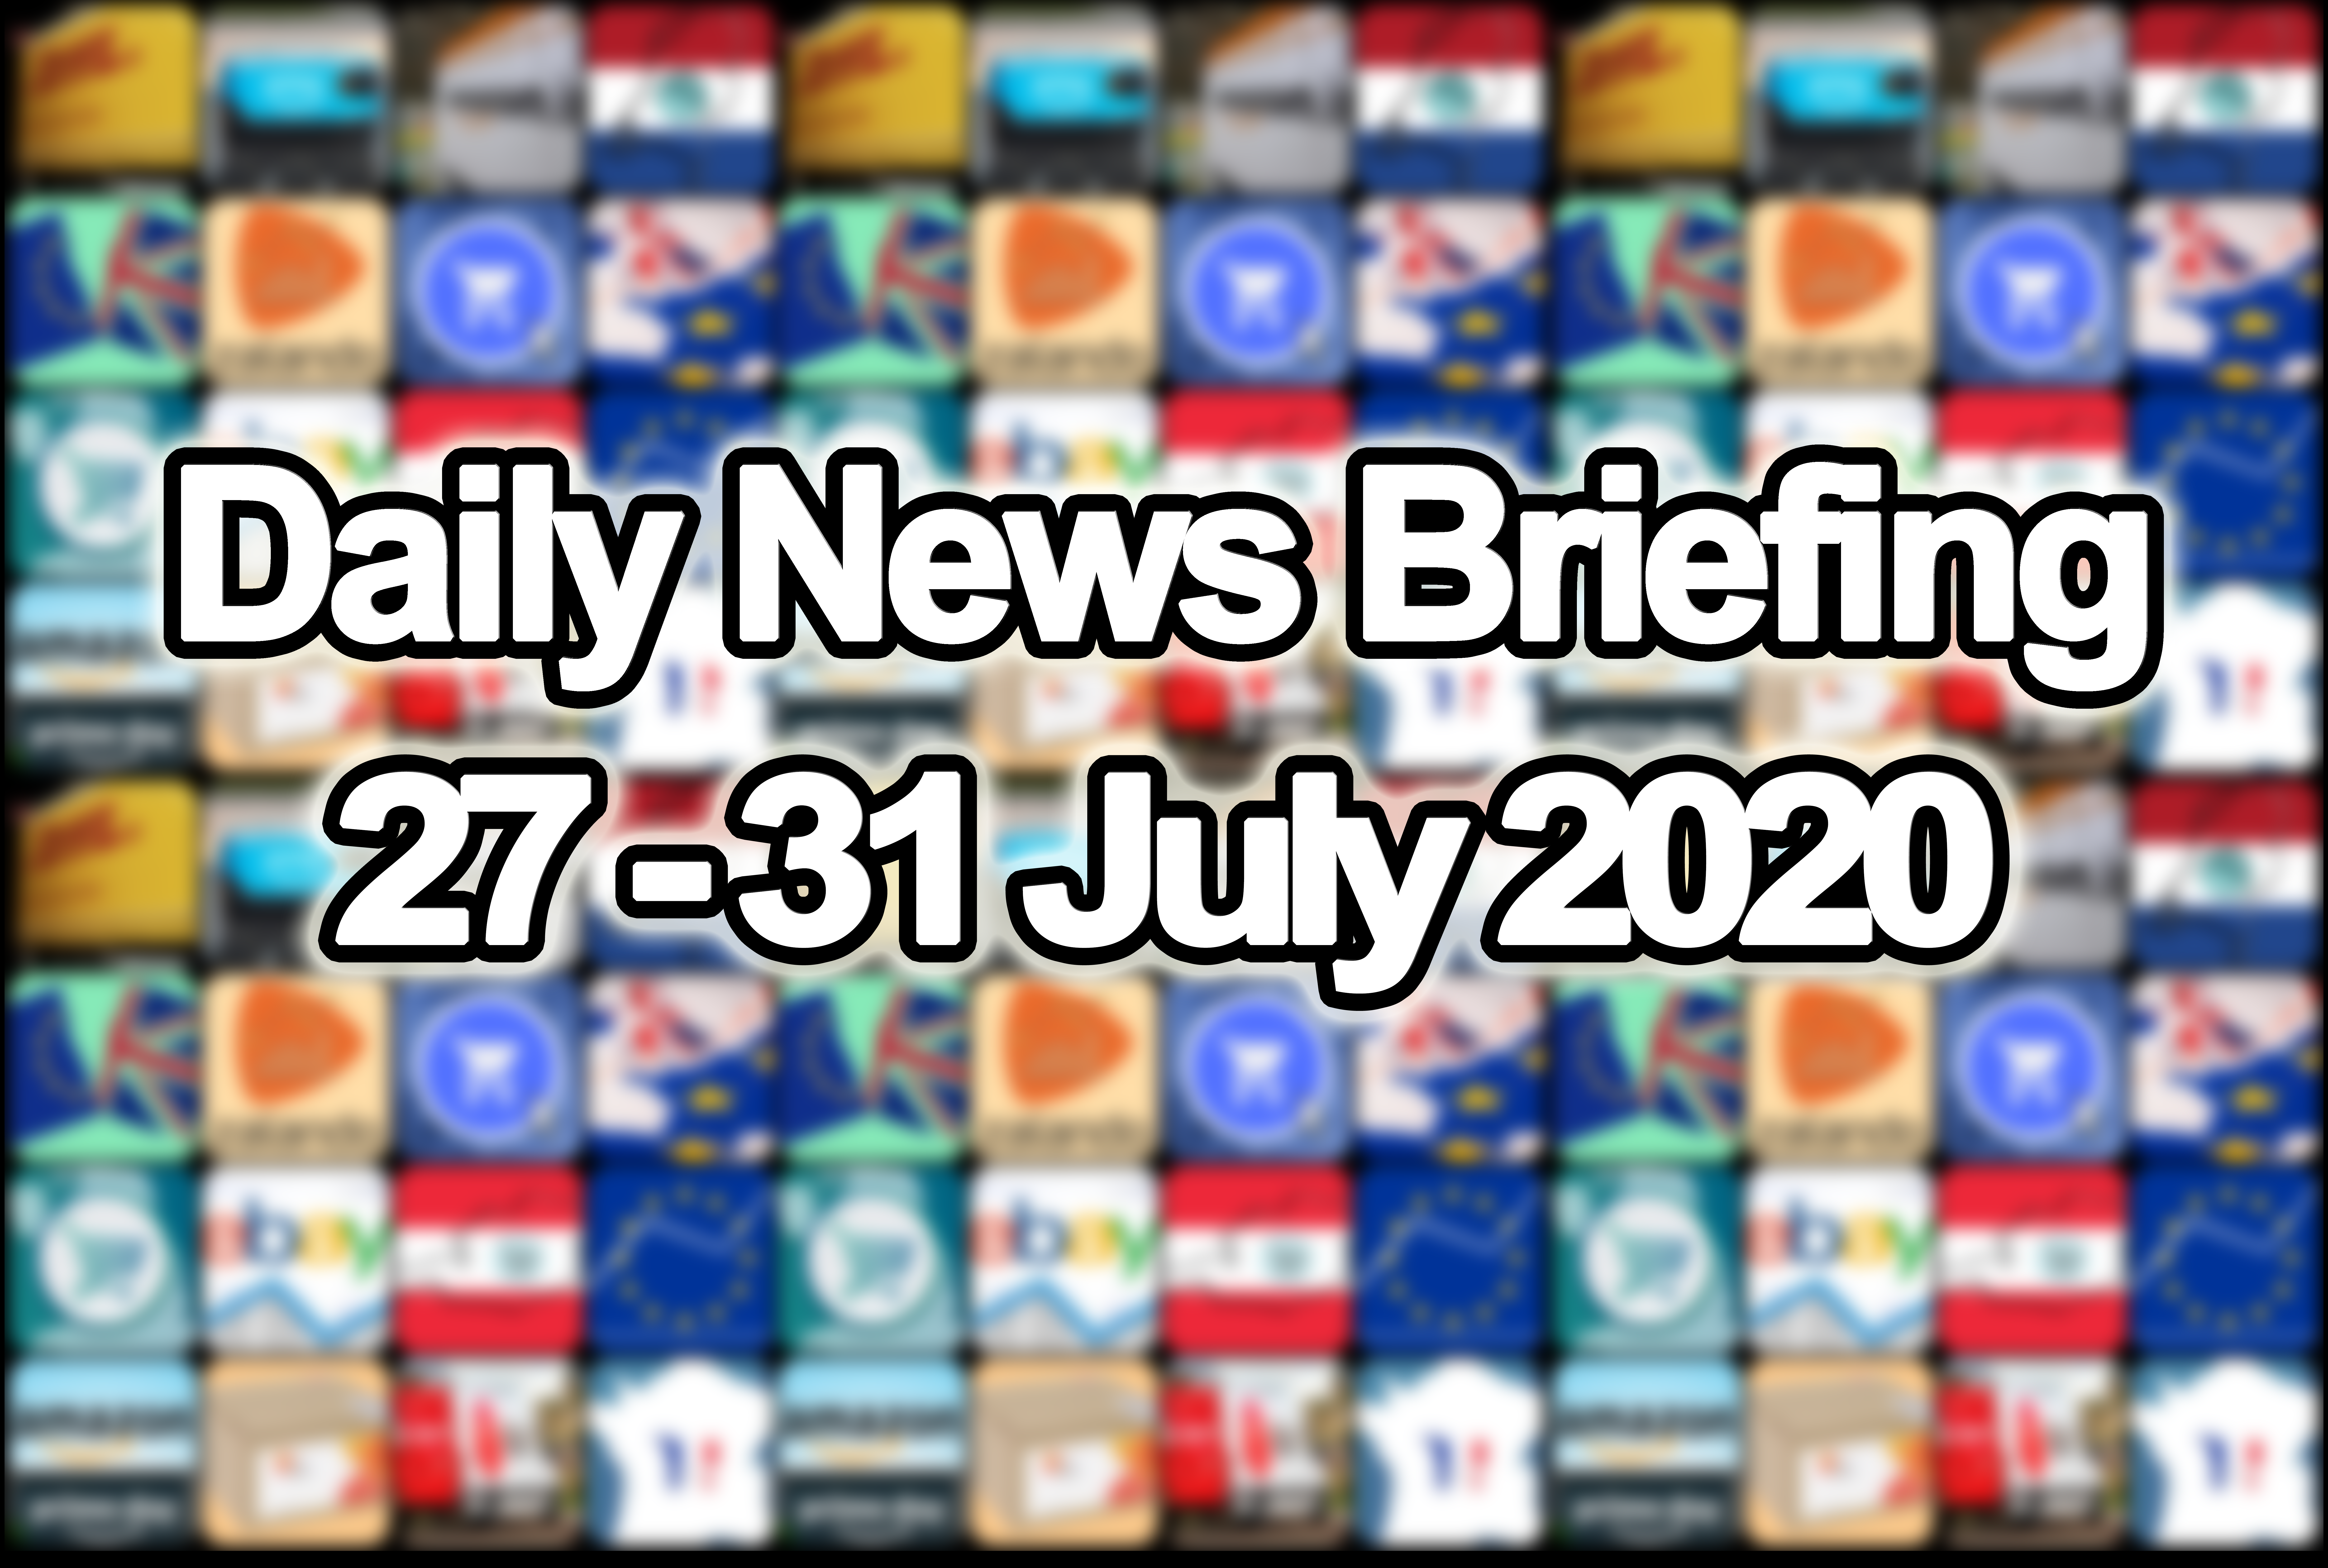 Daily News Briefing – The Top E-commerce & VAT Stories of 27-31 July